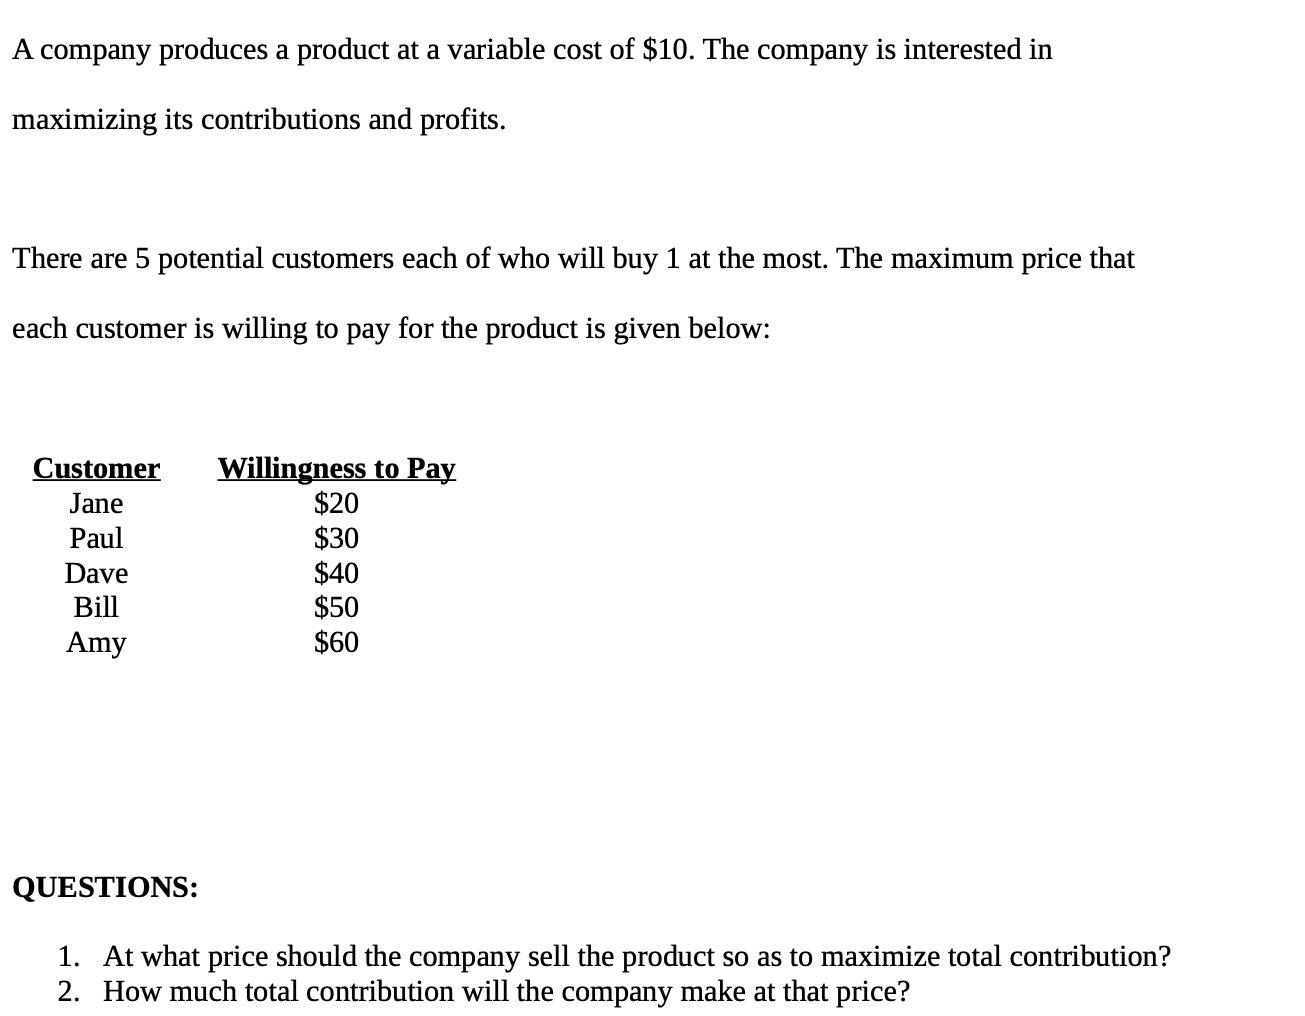 A company produces a product at a variable cost of $10. The company is interested in maximizing its